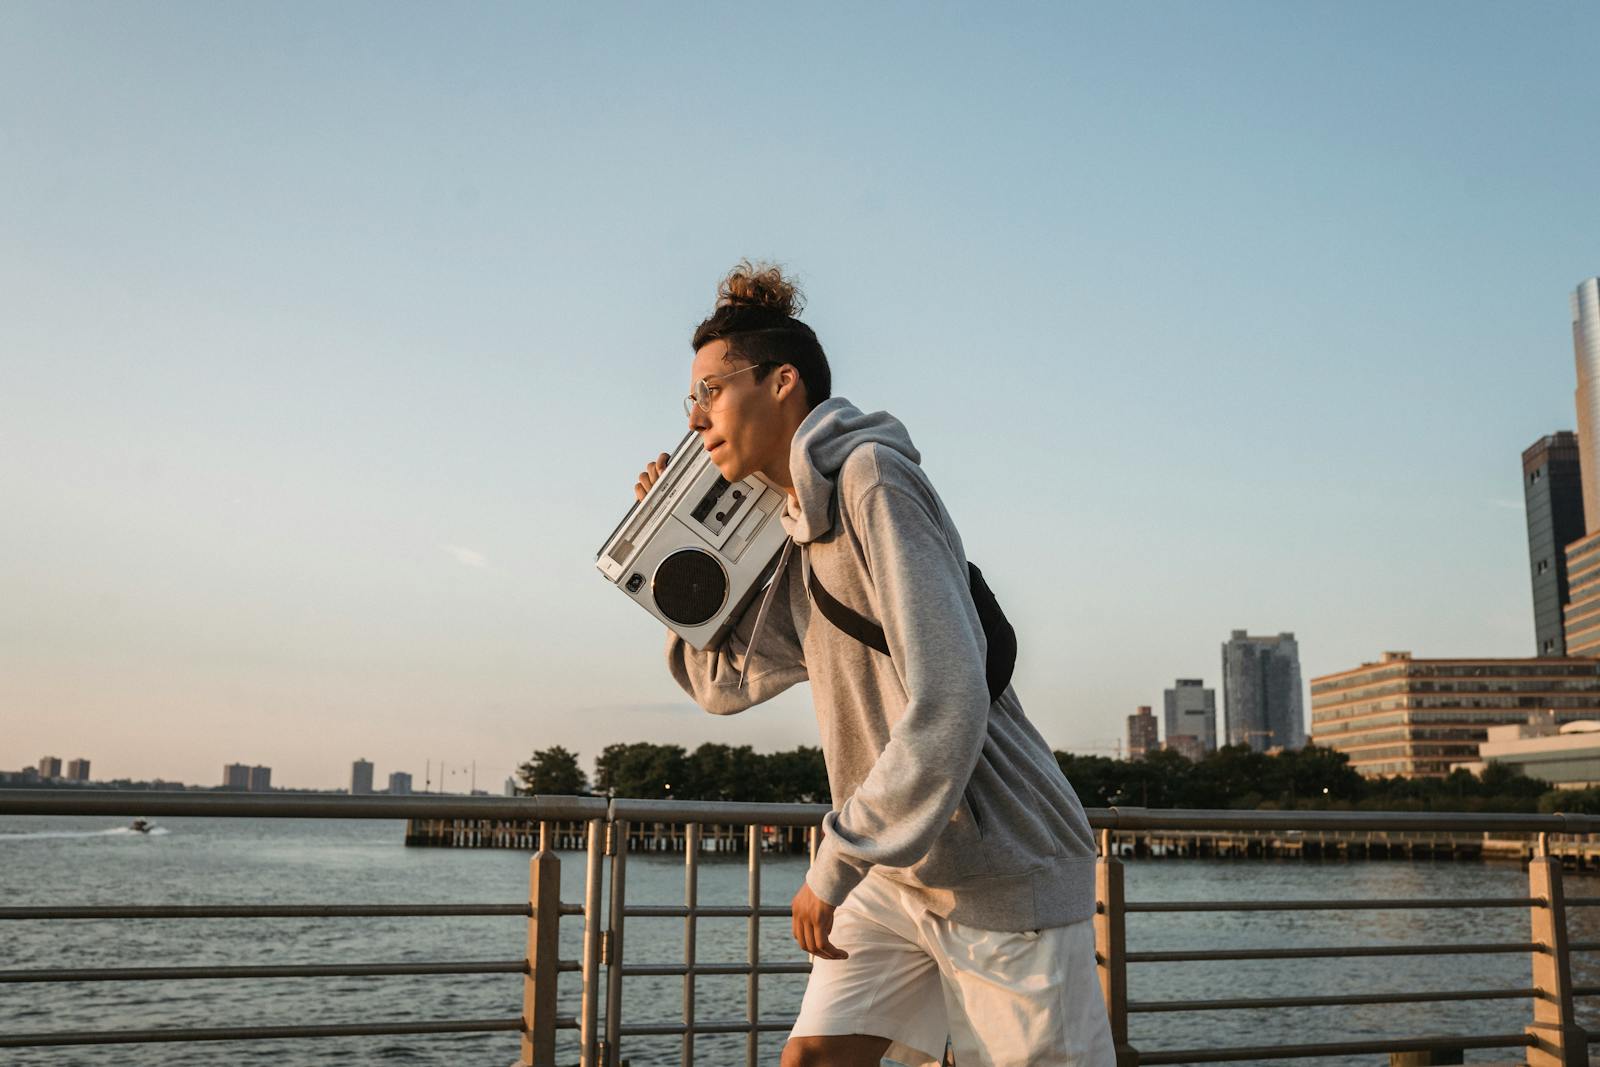 Enjoy Music at Its Best With Boomboxes